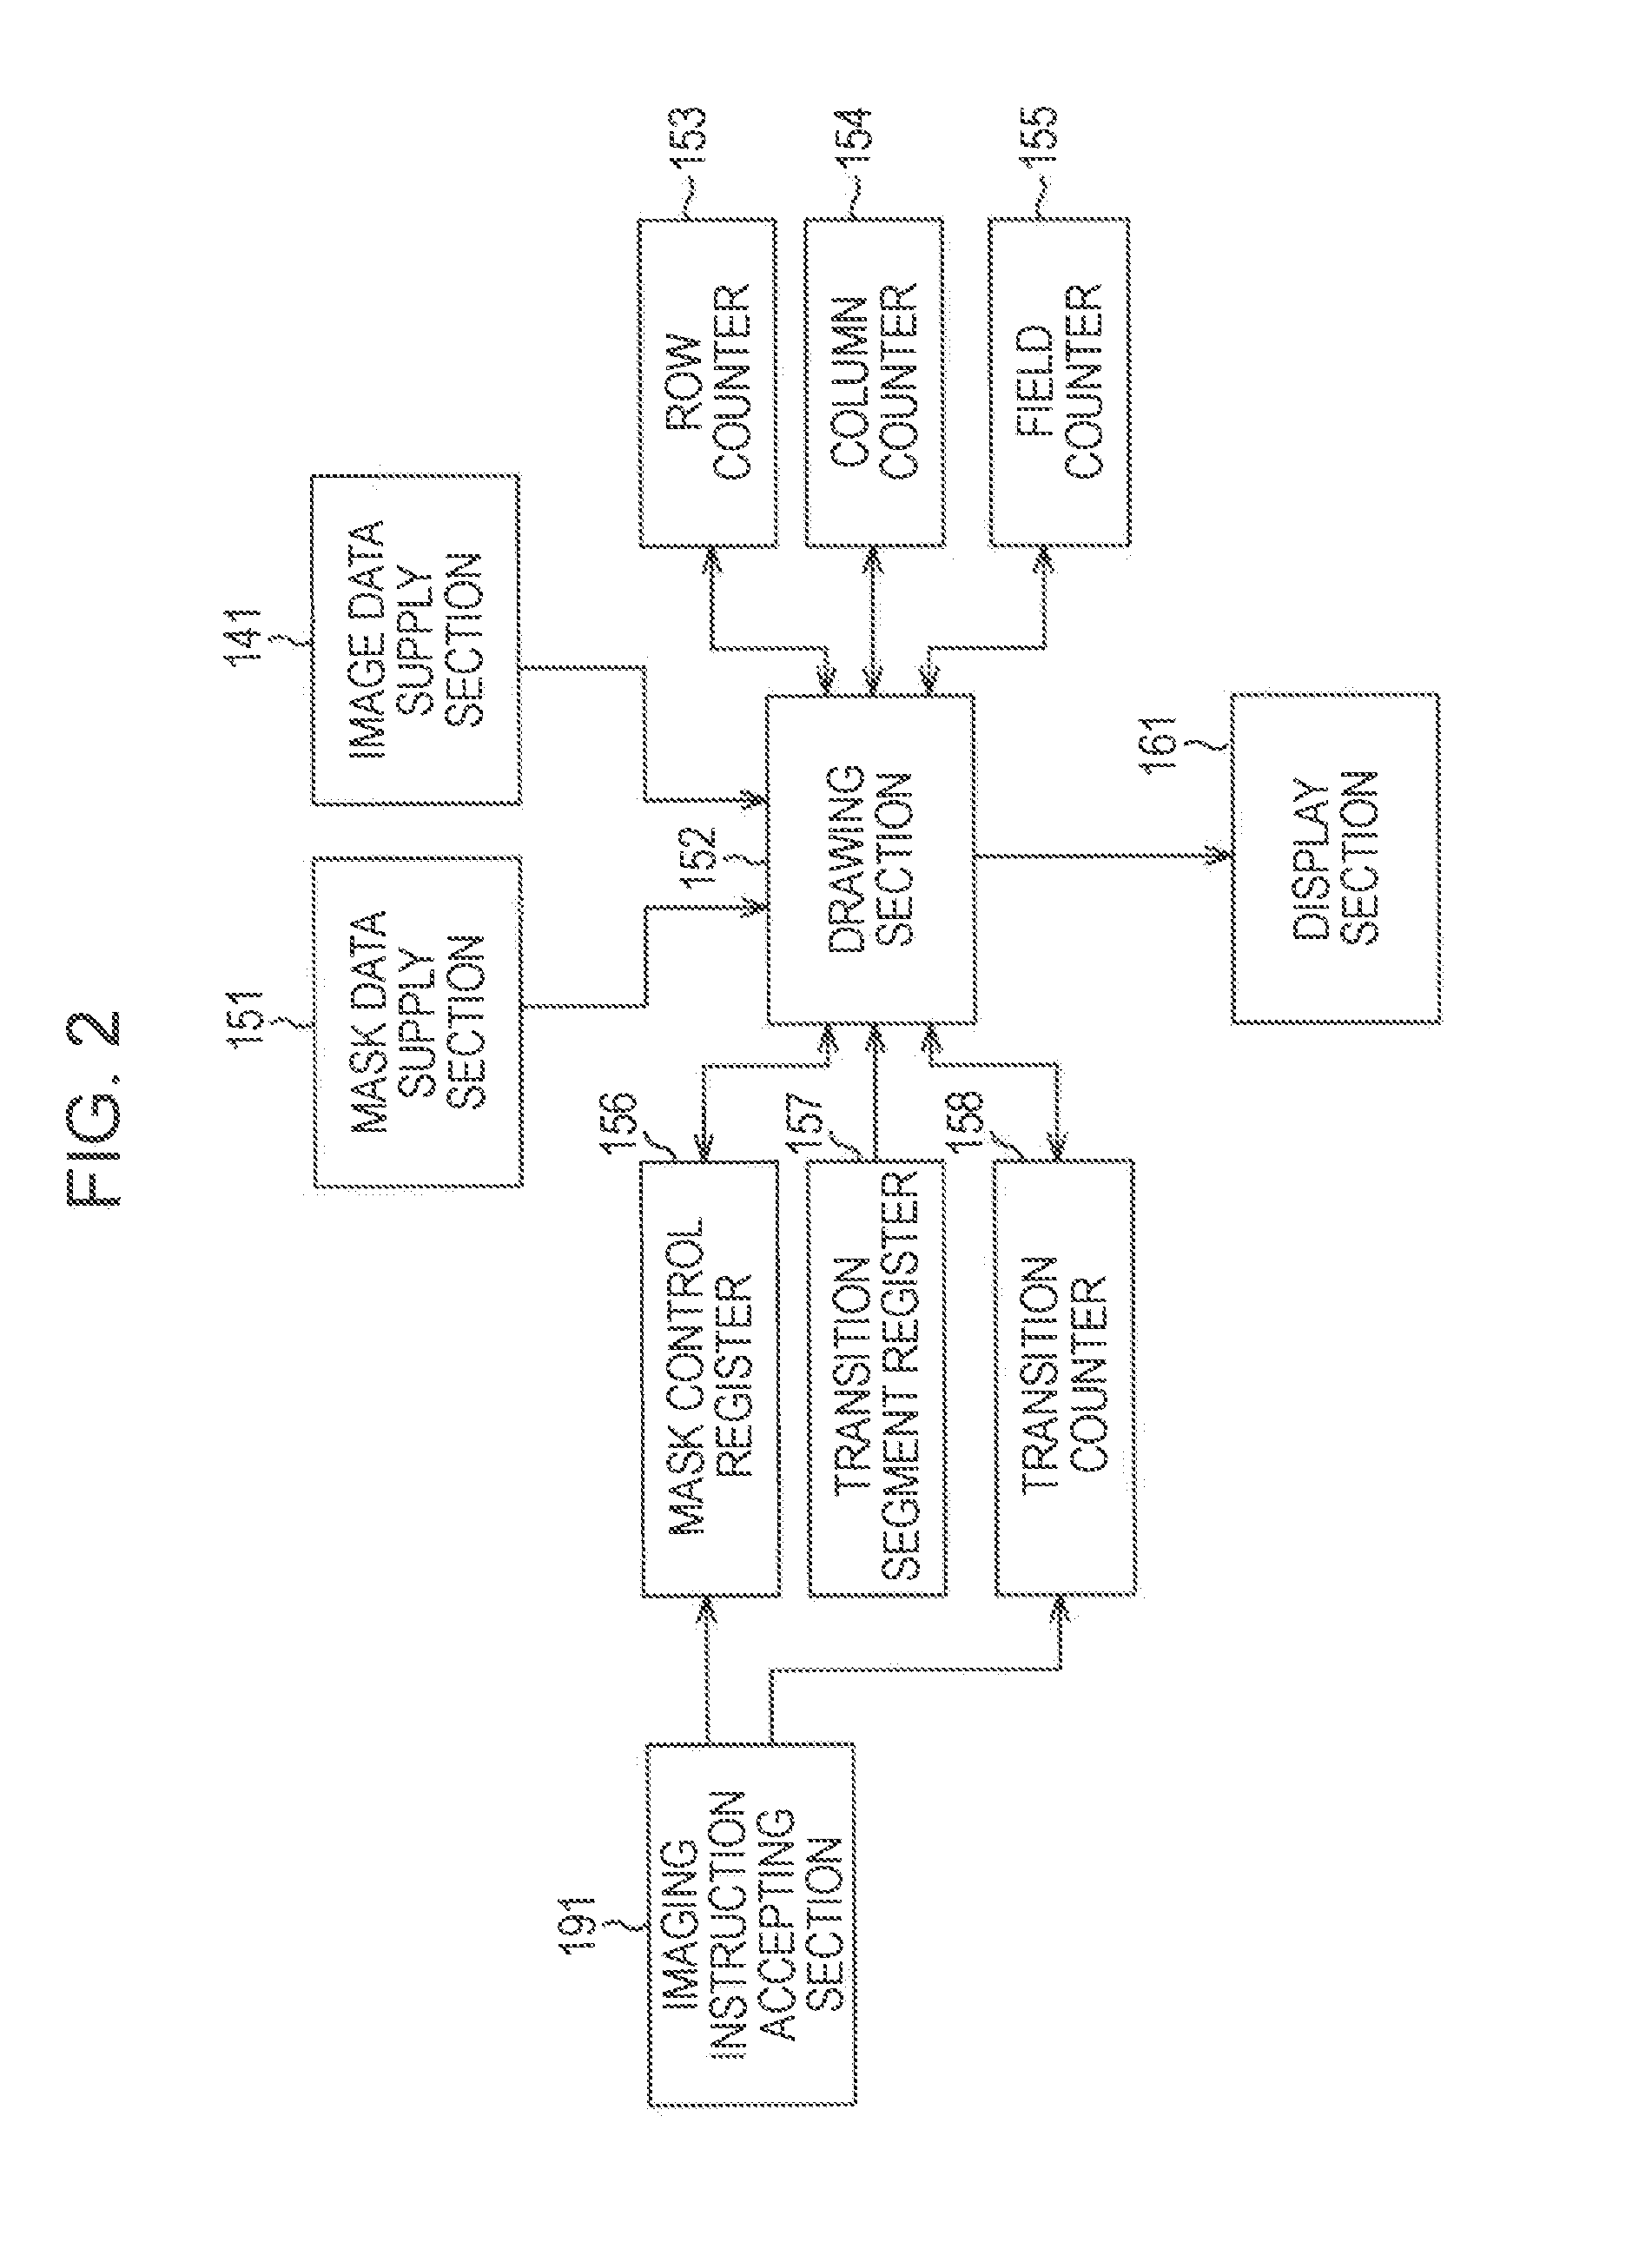 Image display control apparatus, method for controlling the same, and program